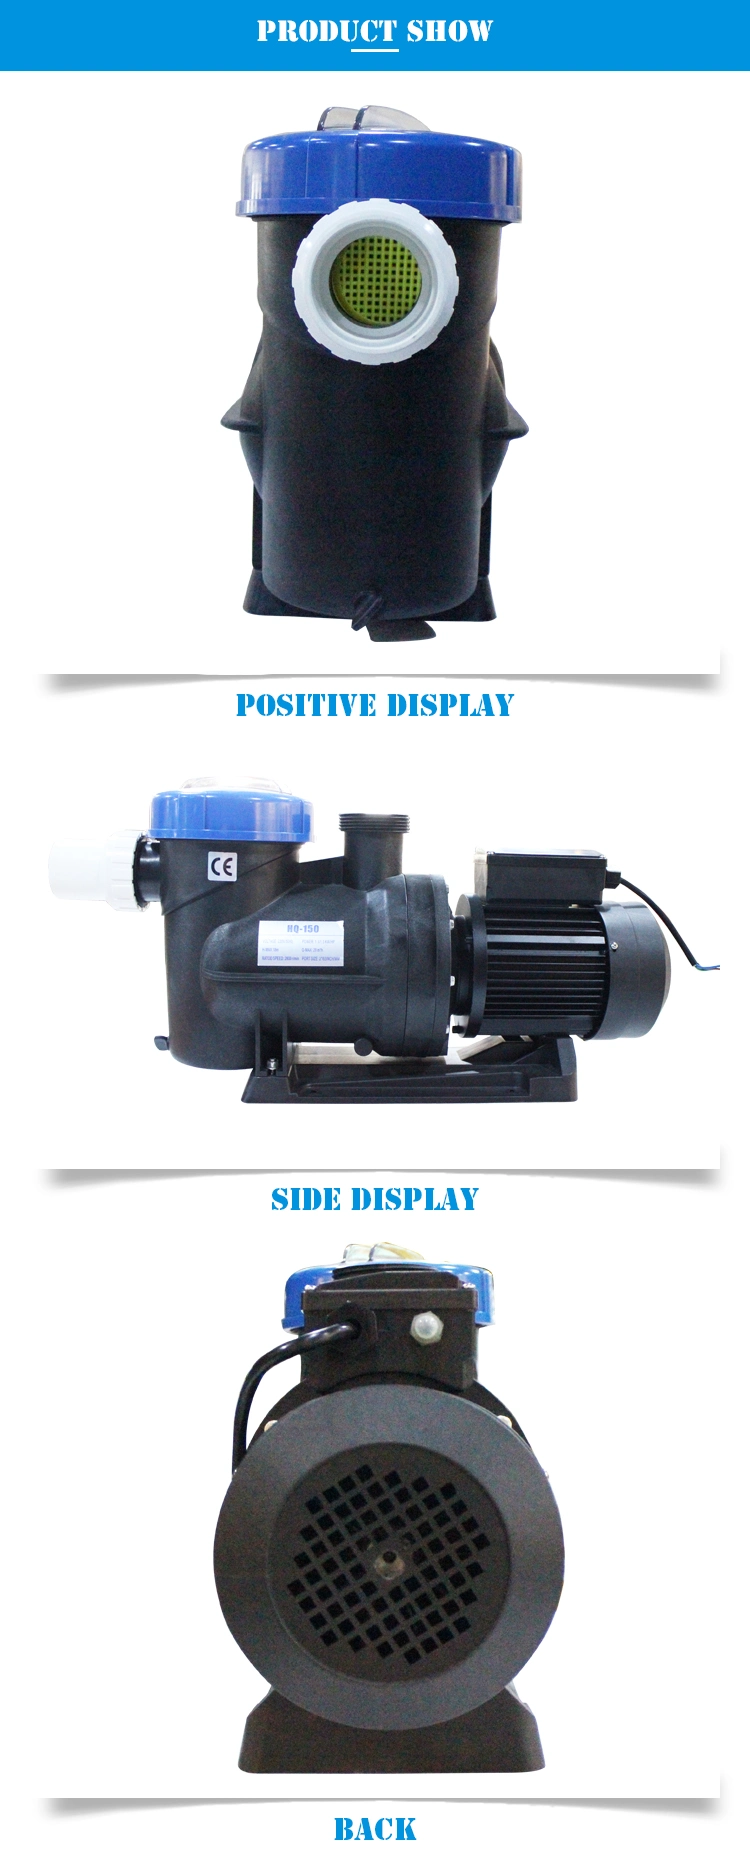 High Quality Electrical Water Pump for SPA and Swimming Pool Pump